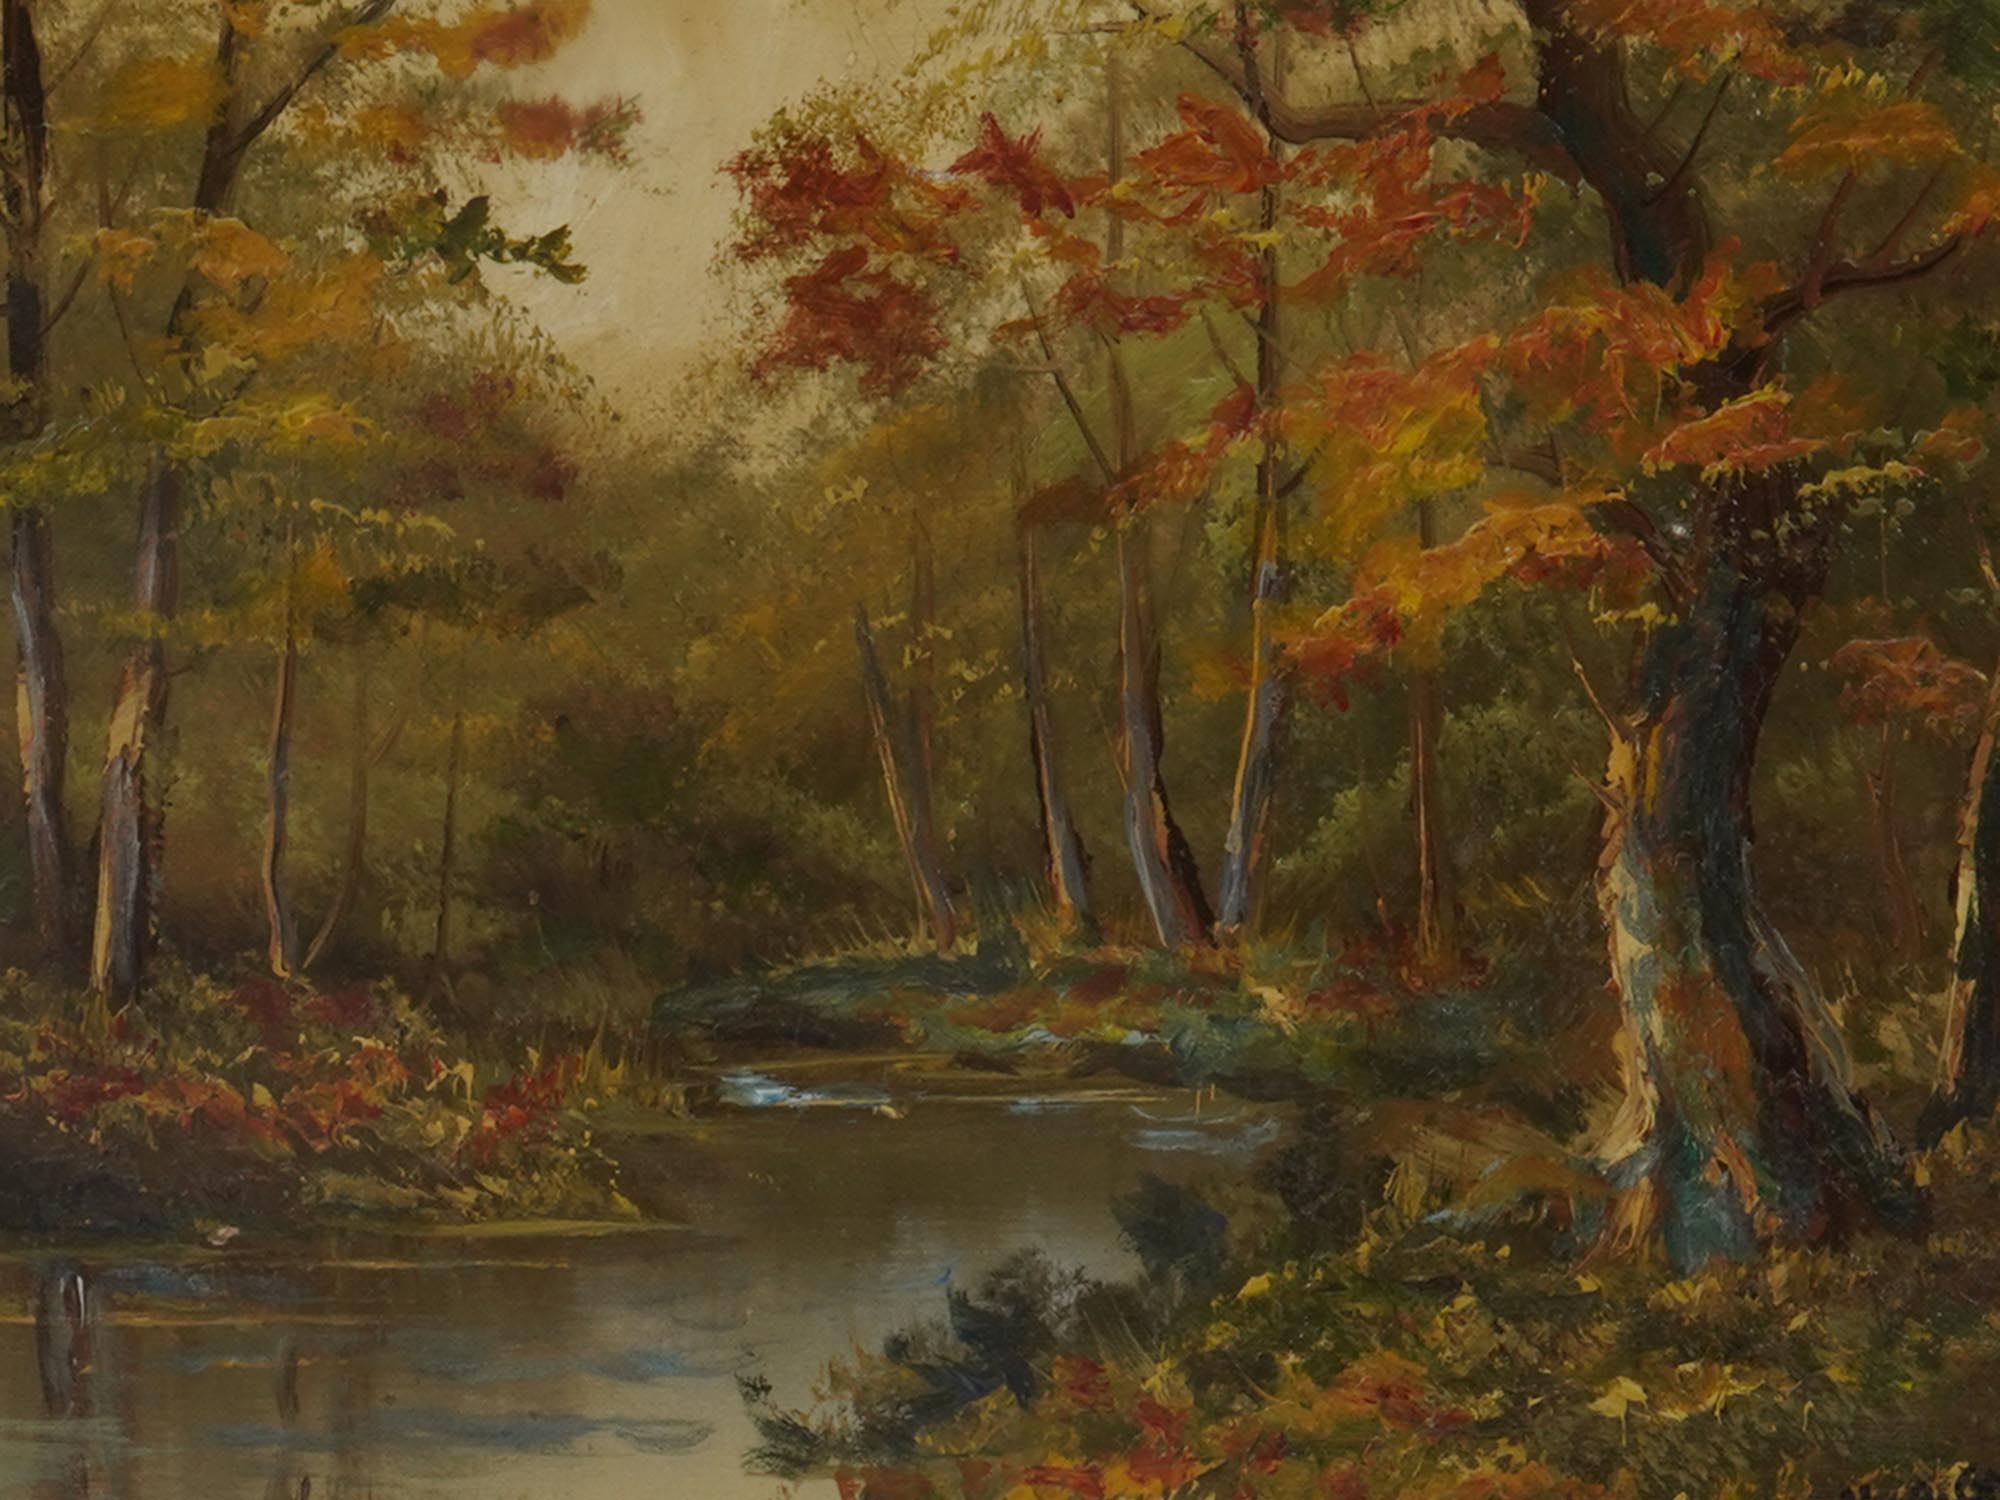 FOREST RIVER LANDSCAPE PAINTING BY EMILE GRUPPE PIC-1